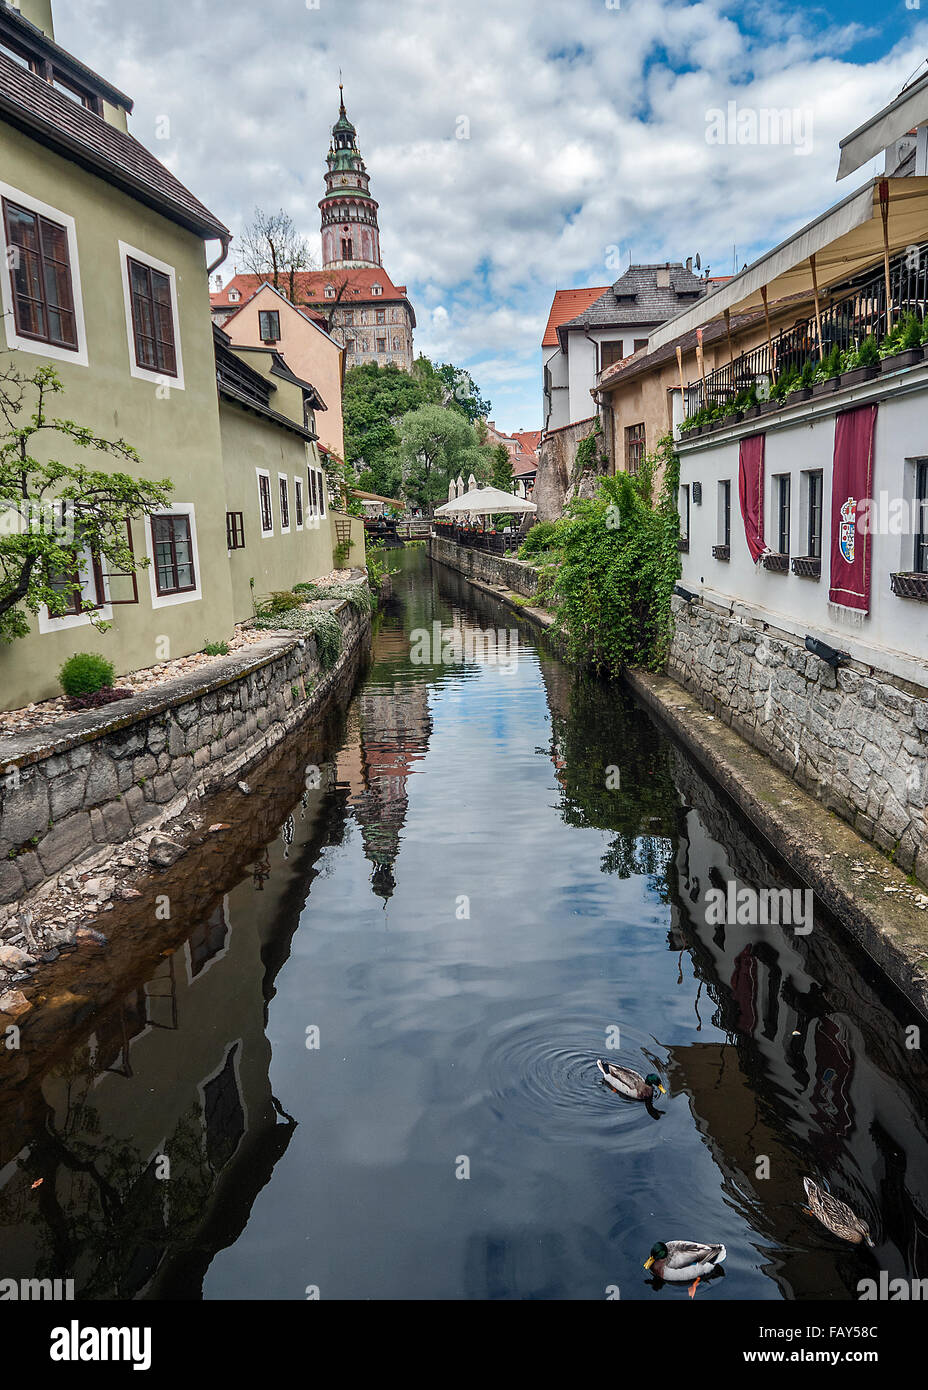 Cesky Krumlov - the pearl of the South Bohemia region. Live ducks in the water of a narrow channel in the center of the city. Stock Photo